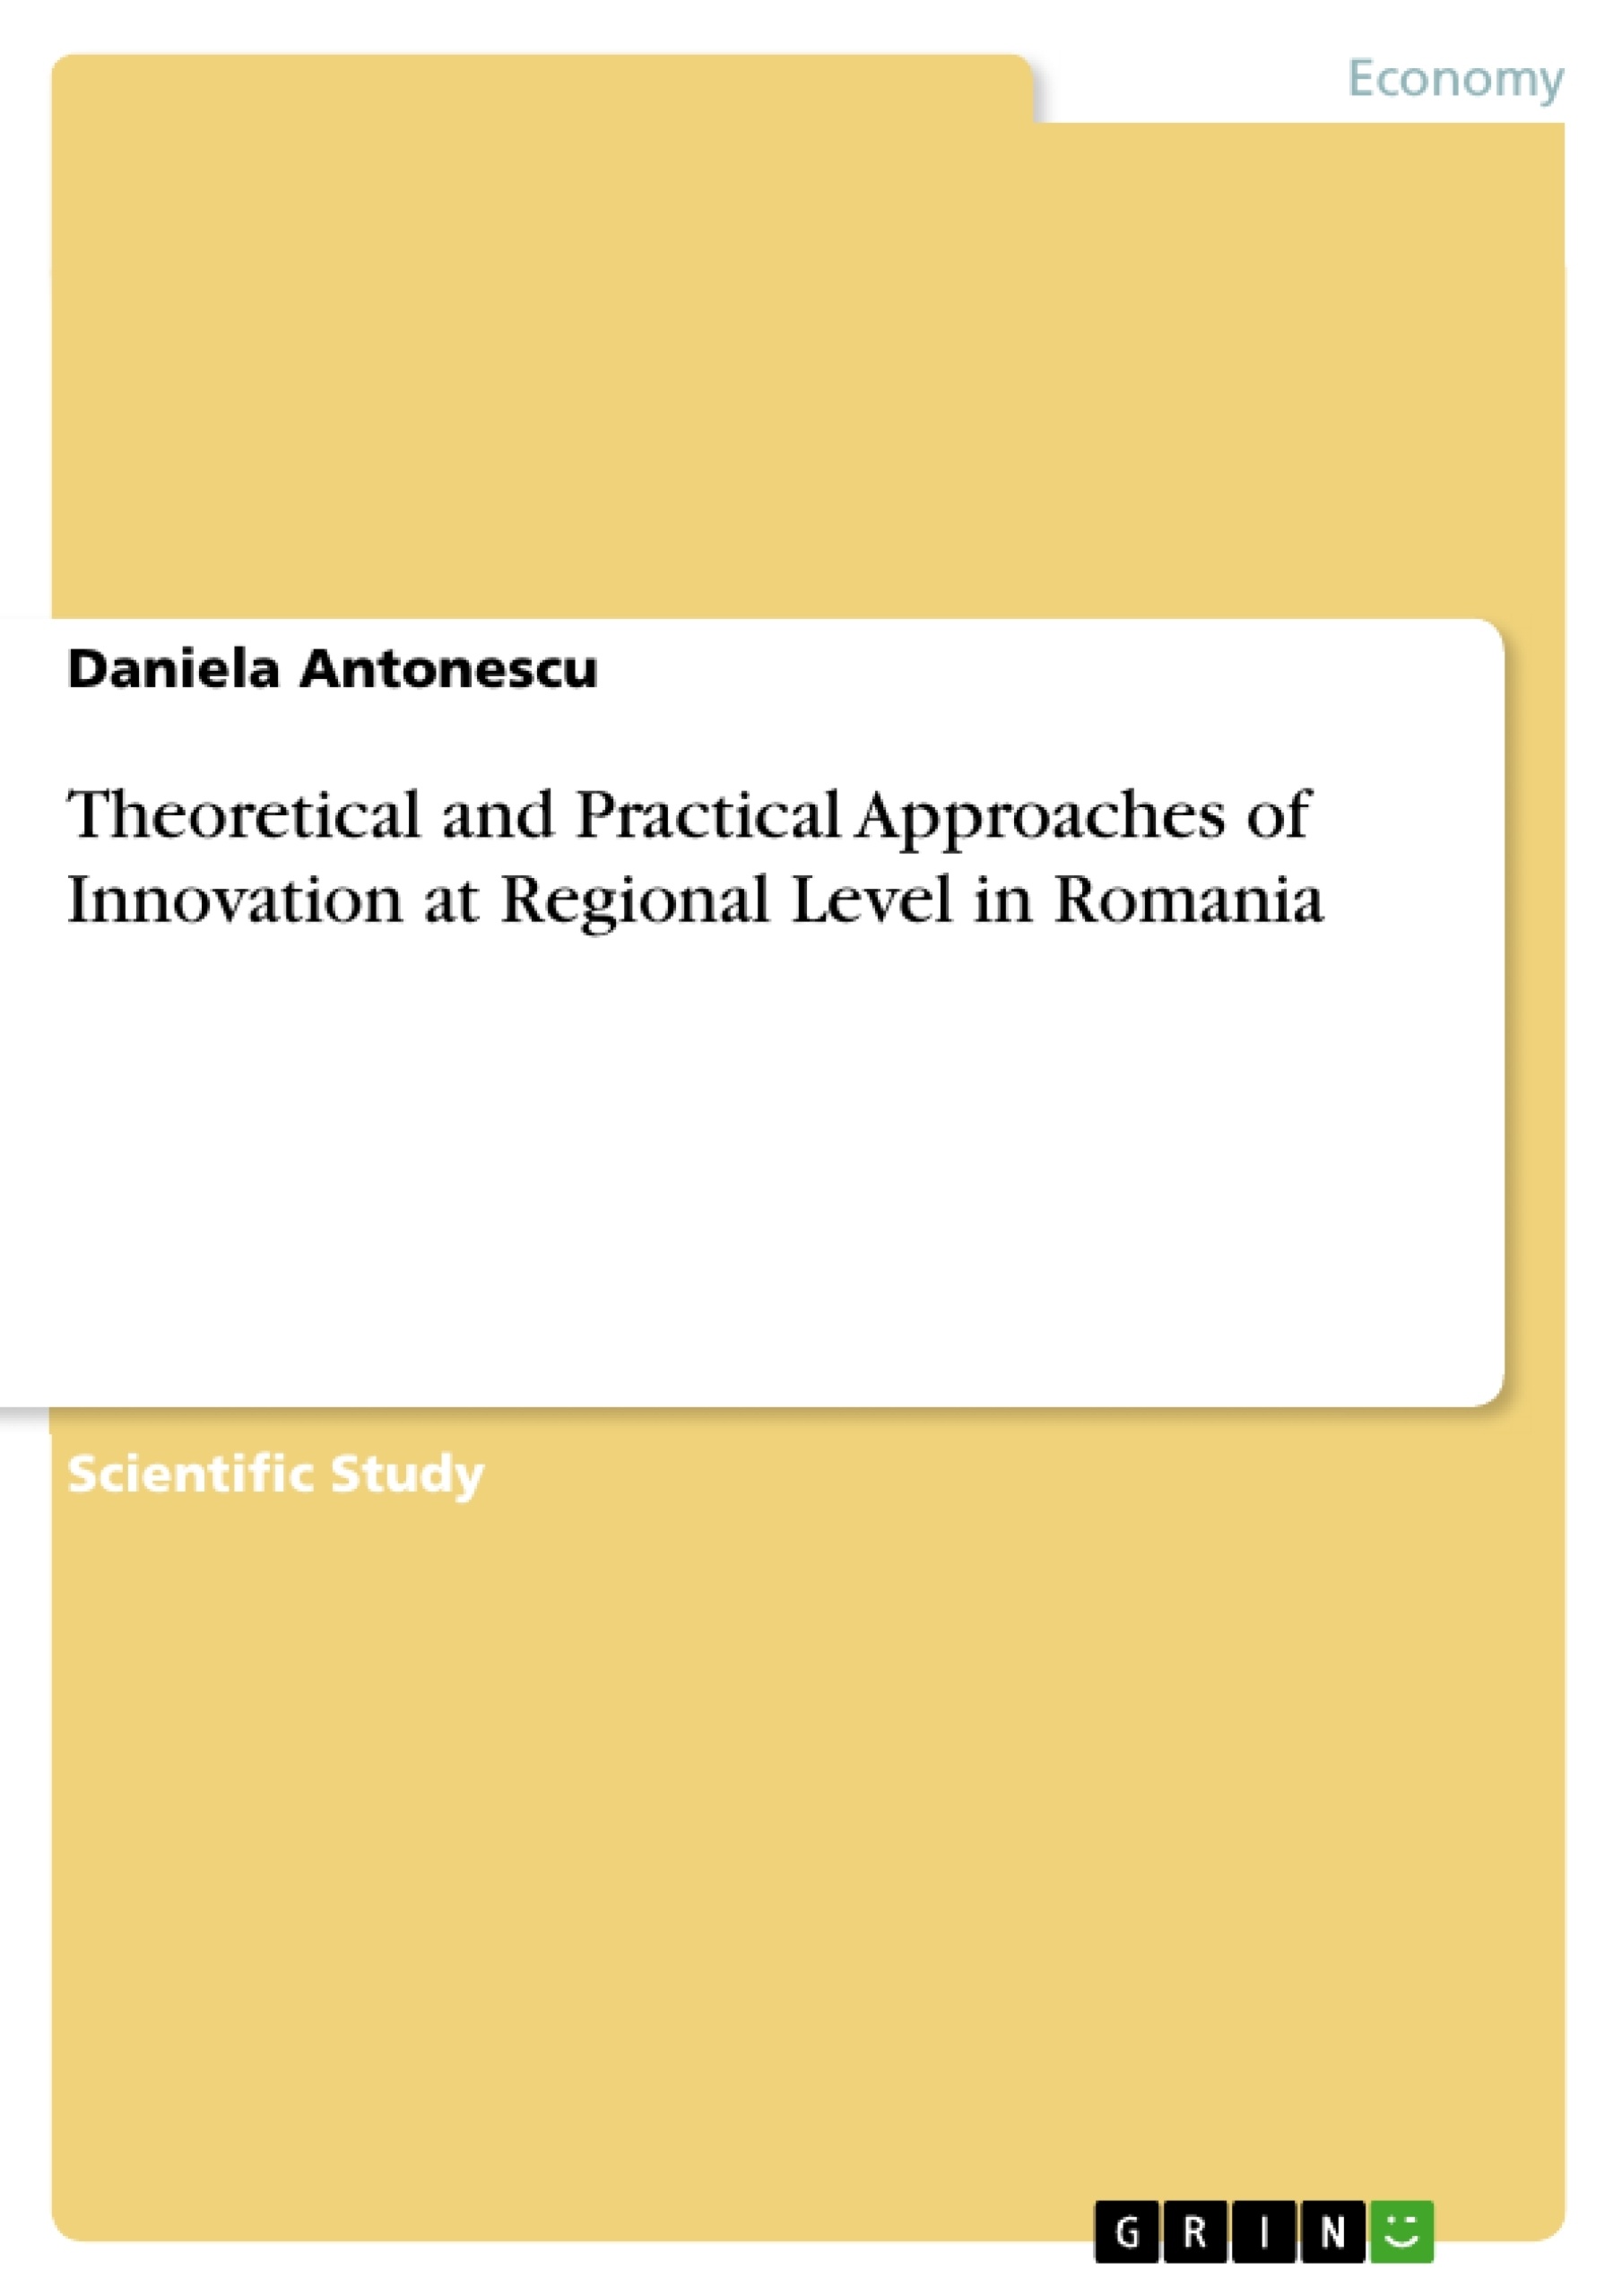 Título: Theoretical and Practical Approaches of Innovation at Regional Level in Romania